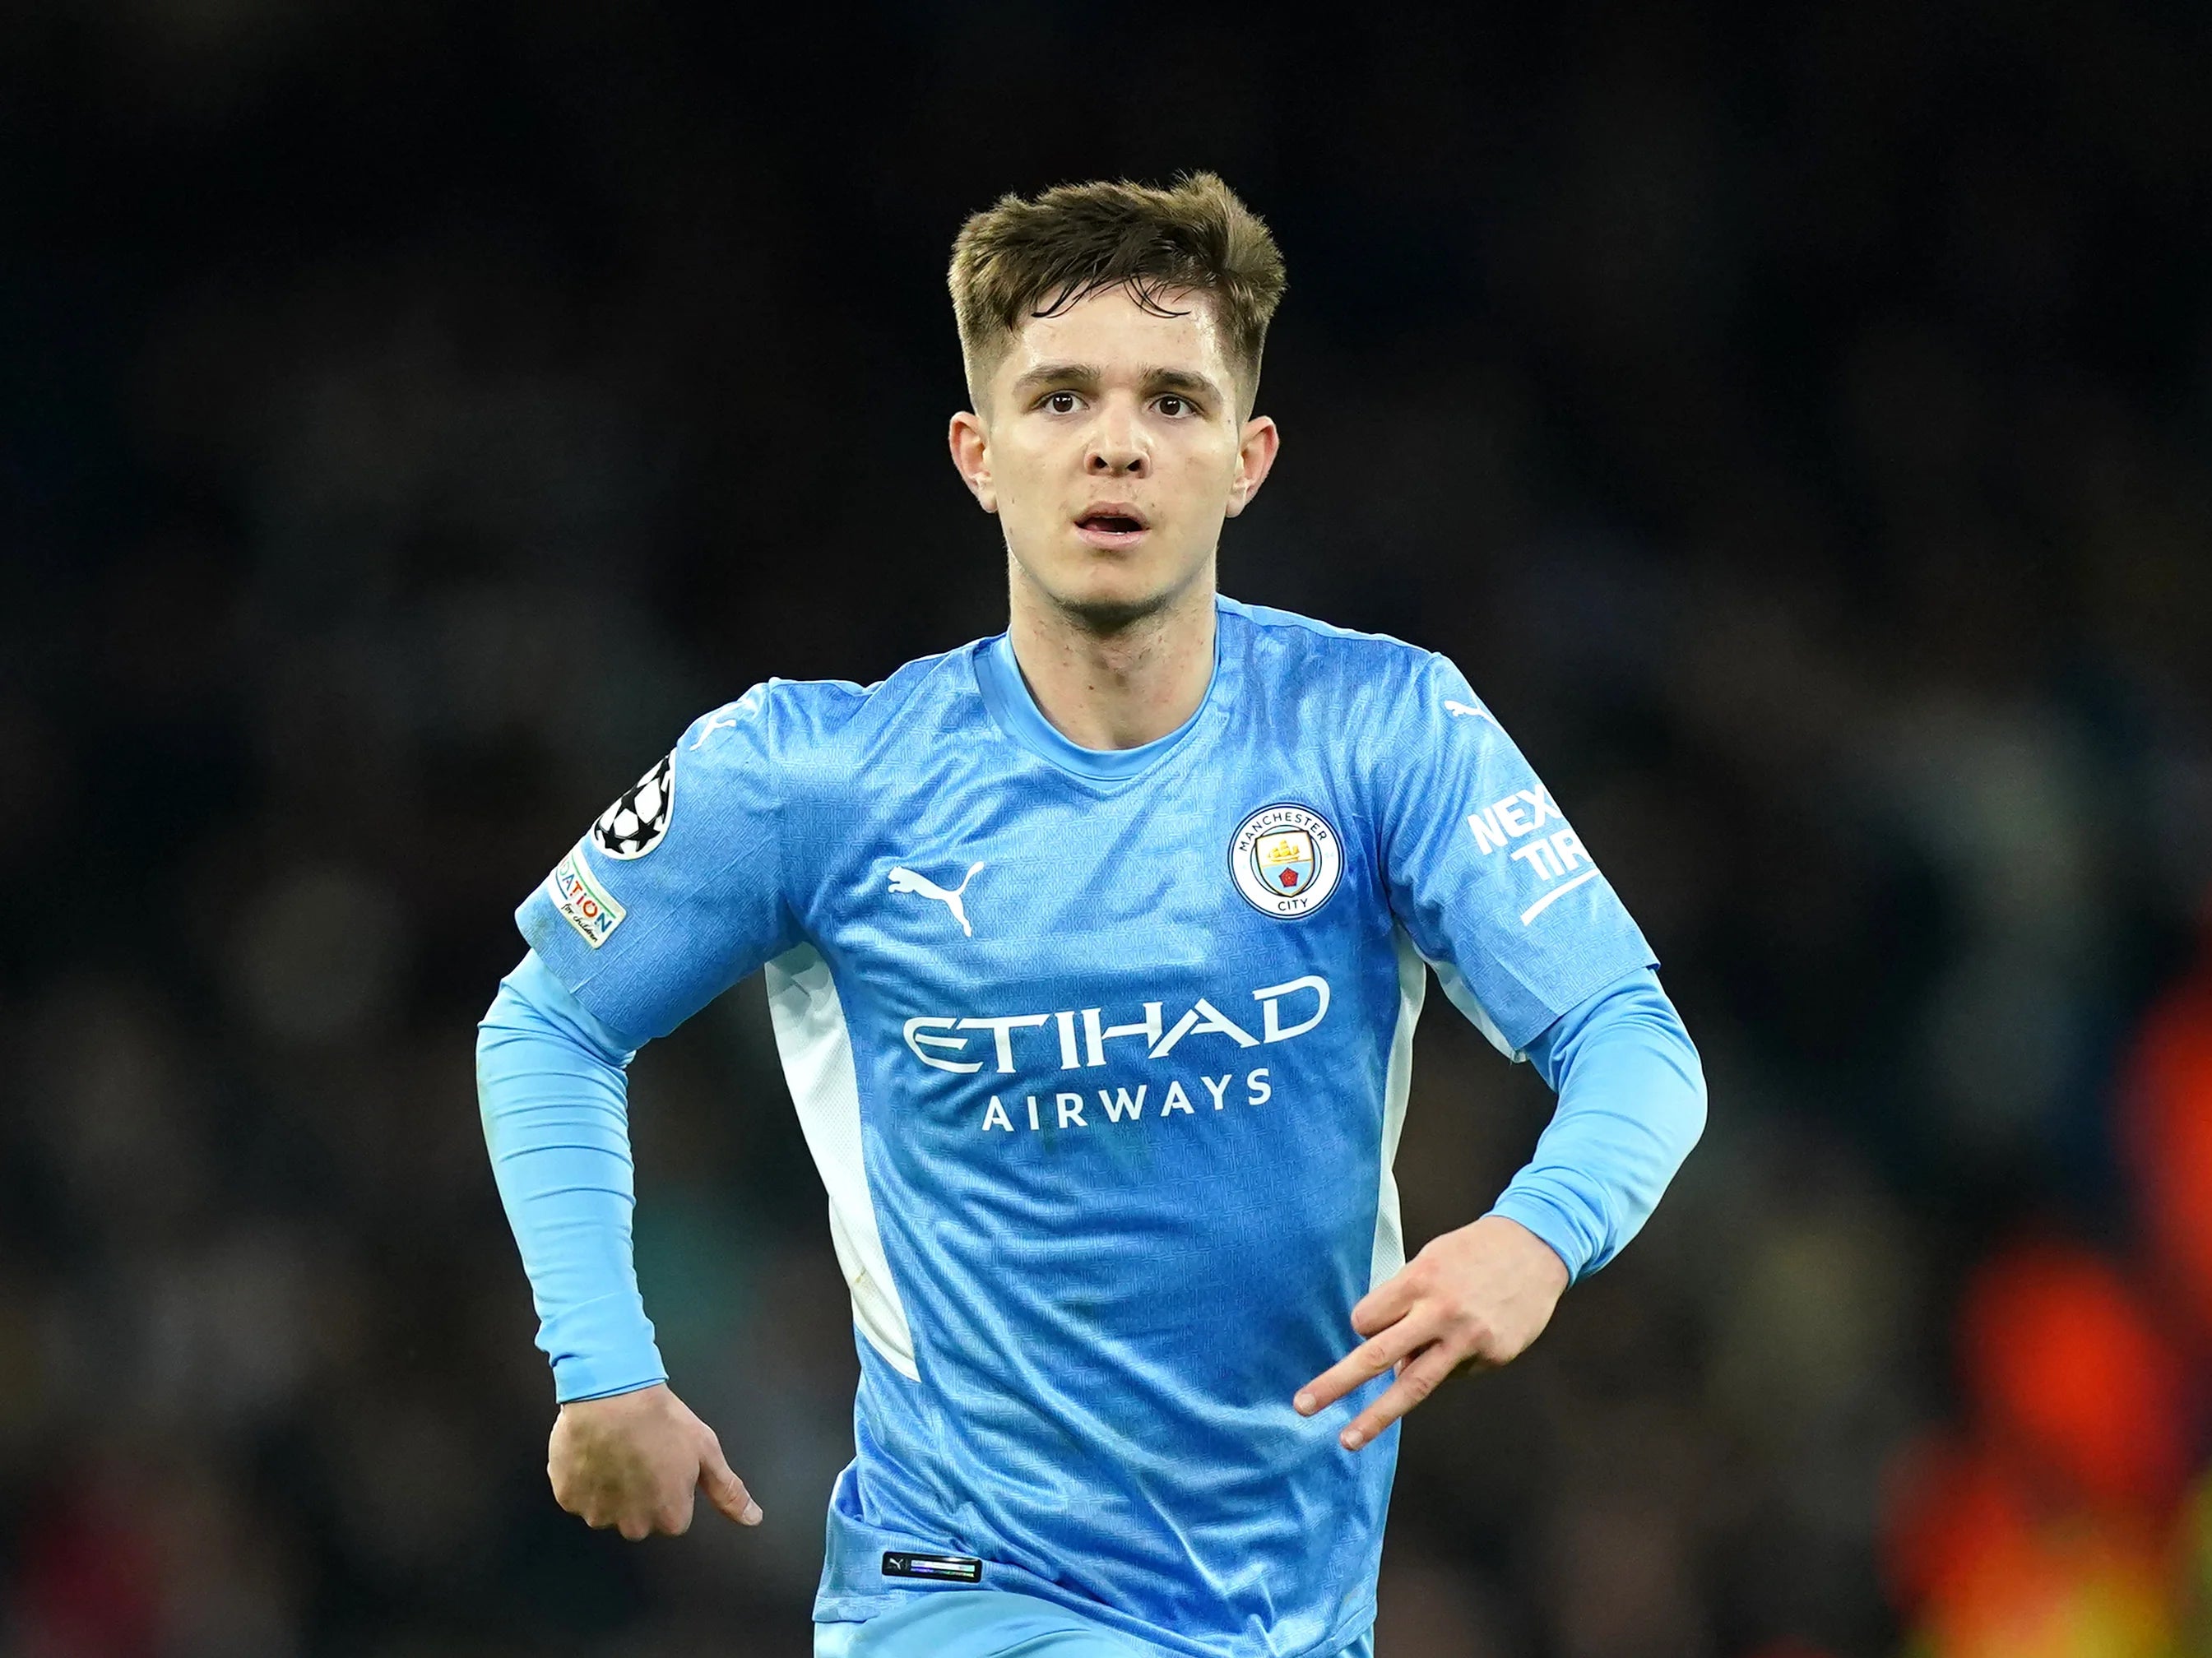 Man City’s James McAtee has joined the England Under-21 squad